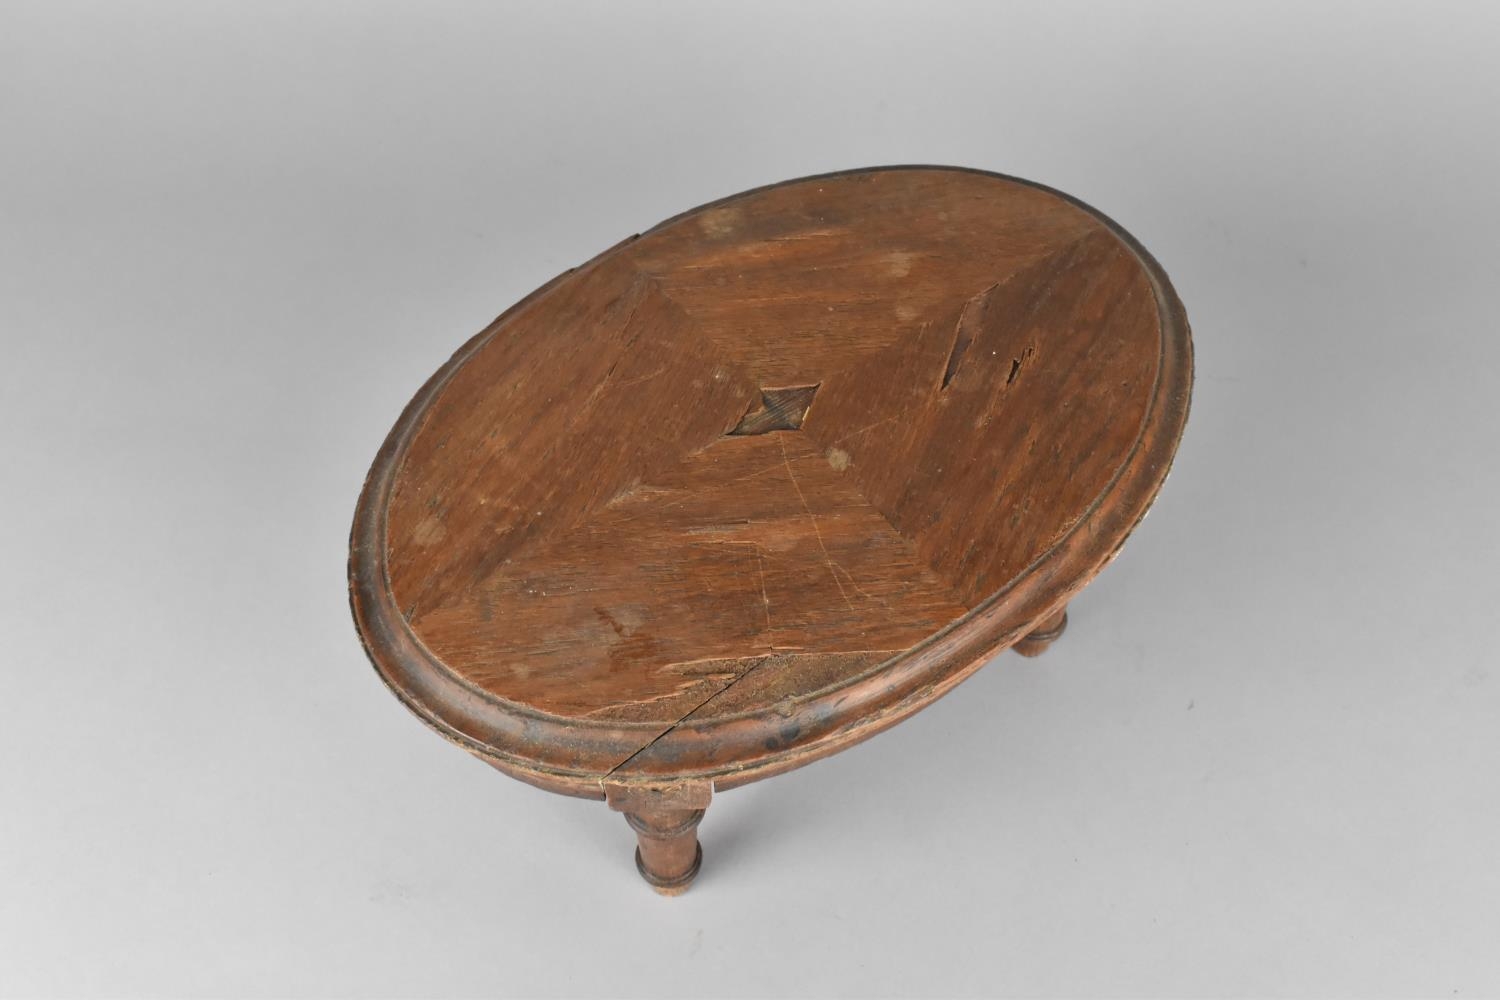 A Small 19th Century Regency Stool with Oval Top Having Parquetry Trim and Brass Sunburst Mounts - Image 3 of 3